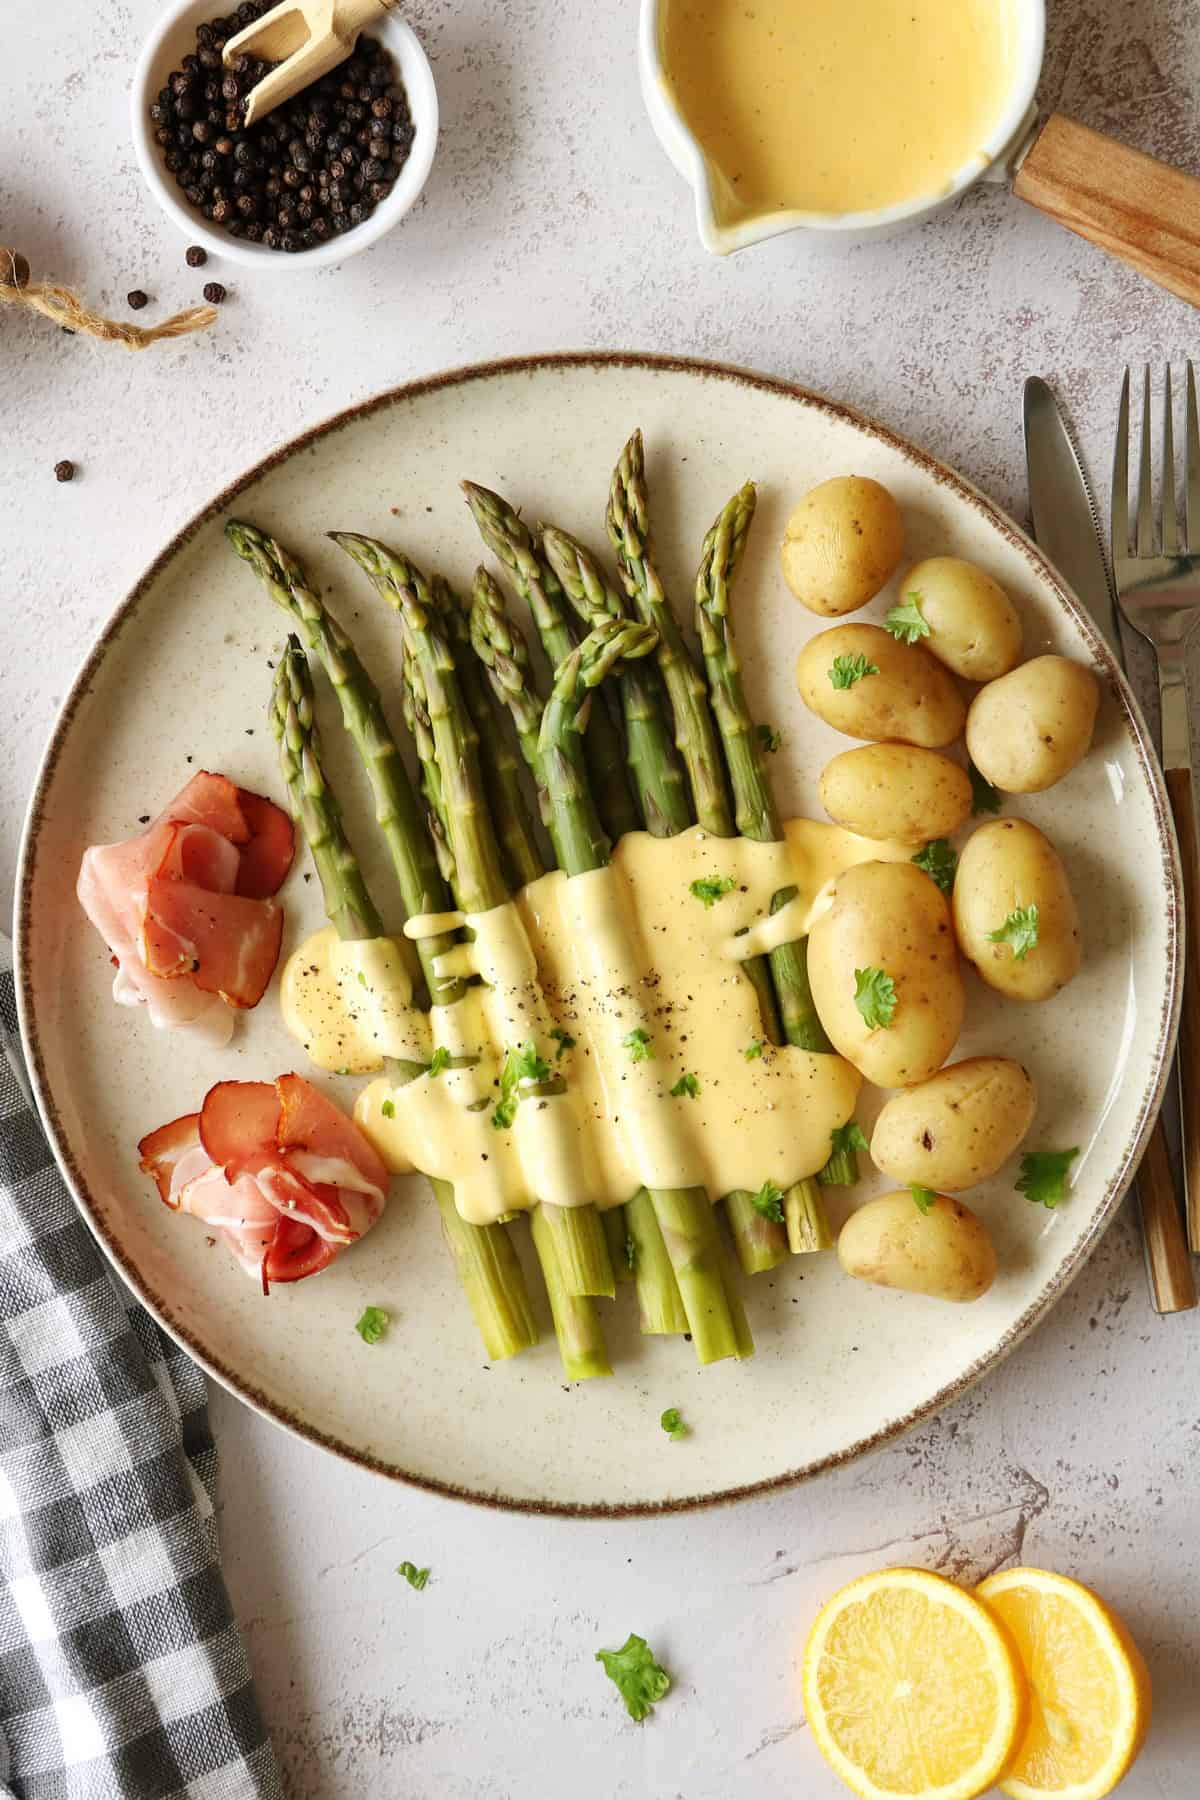 A plate of green asparagus with hollandaise sauce, potatoes and ham.